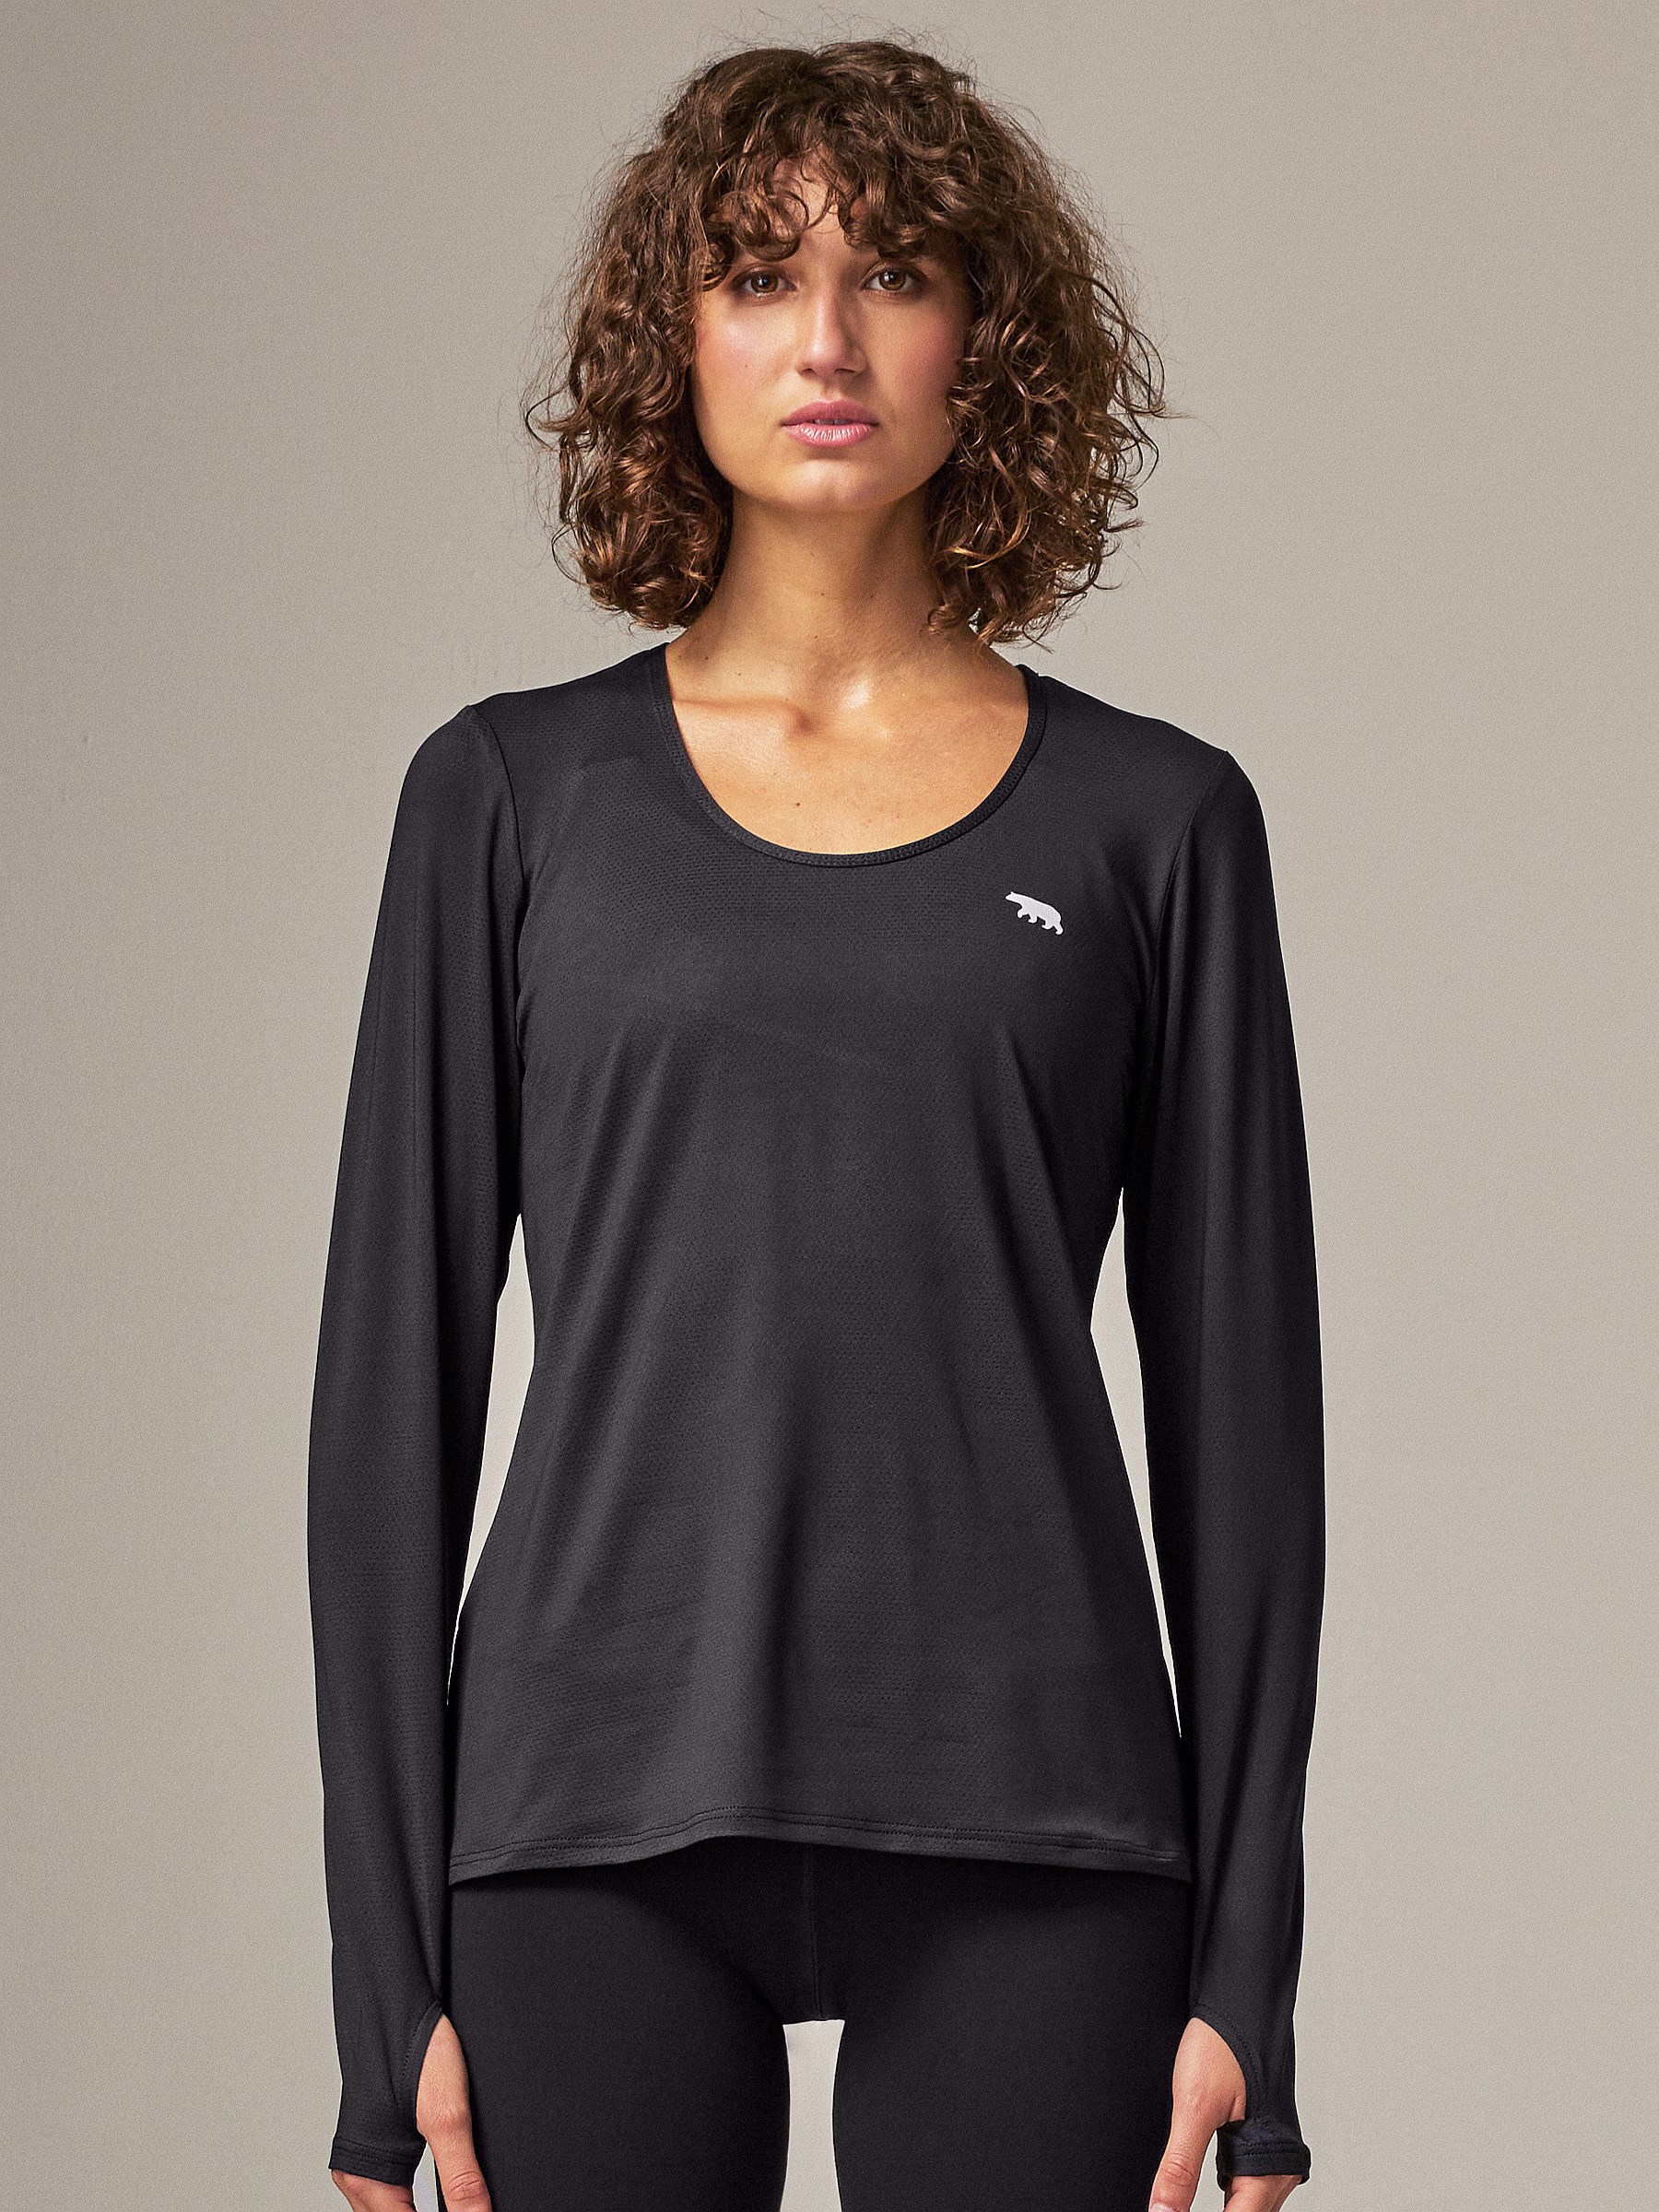 Running Bare Warm Down Workout Tee. Activewear Tops & T-shirts